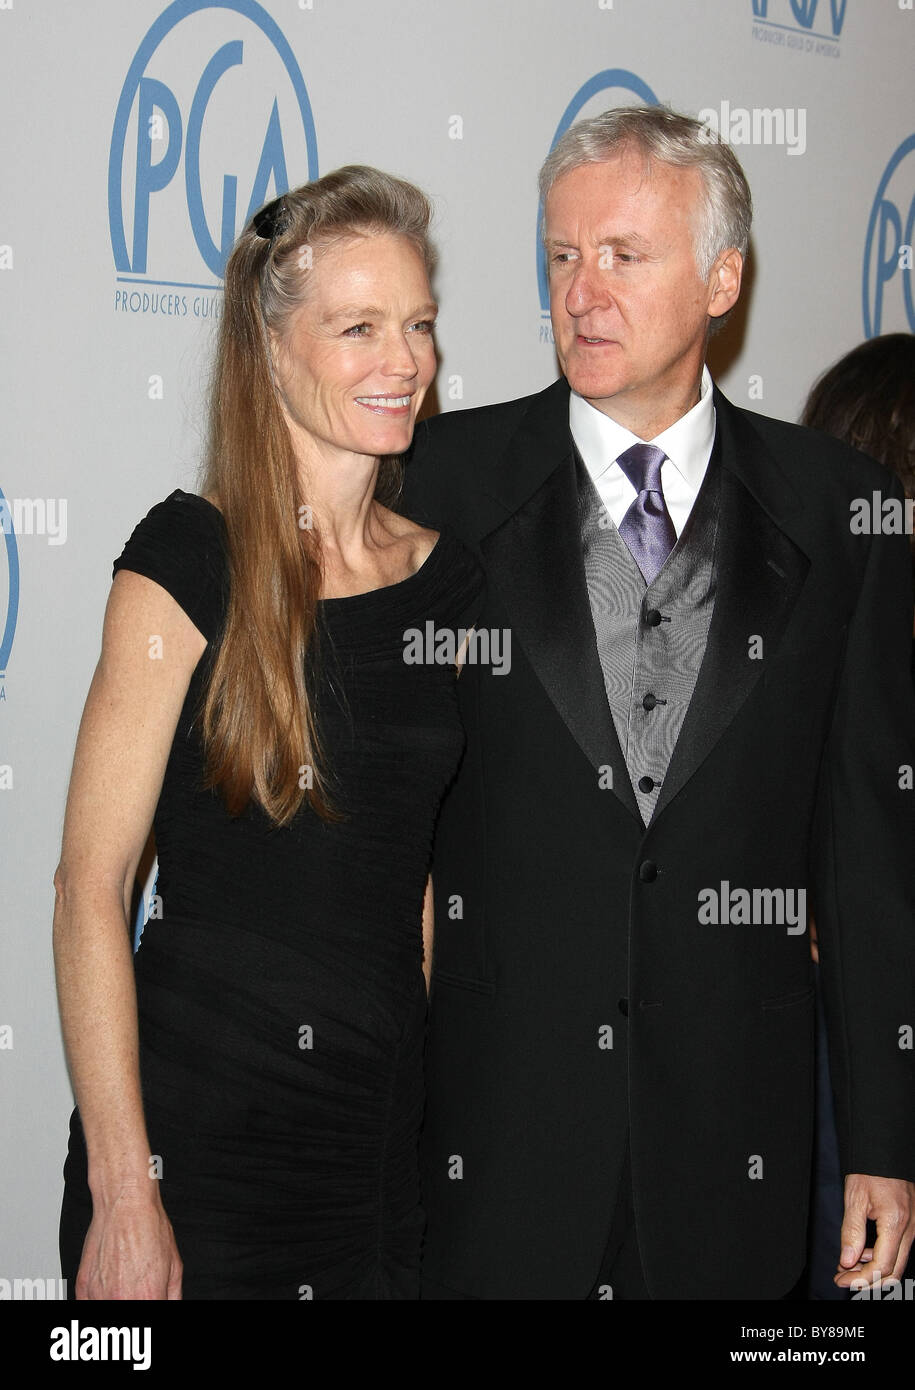 SUZY AMIS JAMES CAMERON 22ND ANNUAL PRODUCERS GUILD OF AMERICA AWARDS BEVERLY HILLS LOS ANGELES CALIFORNIA USA 22 January 20 Stock Photo